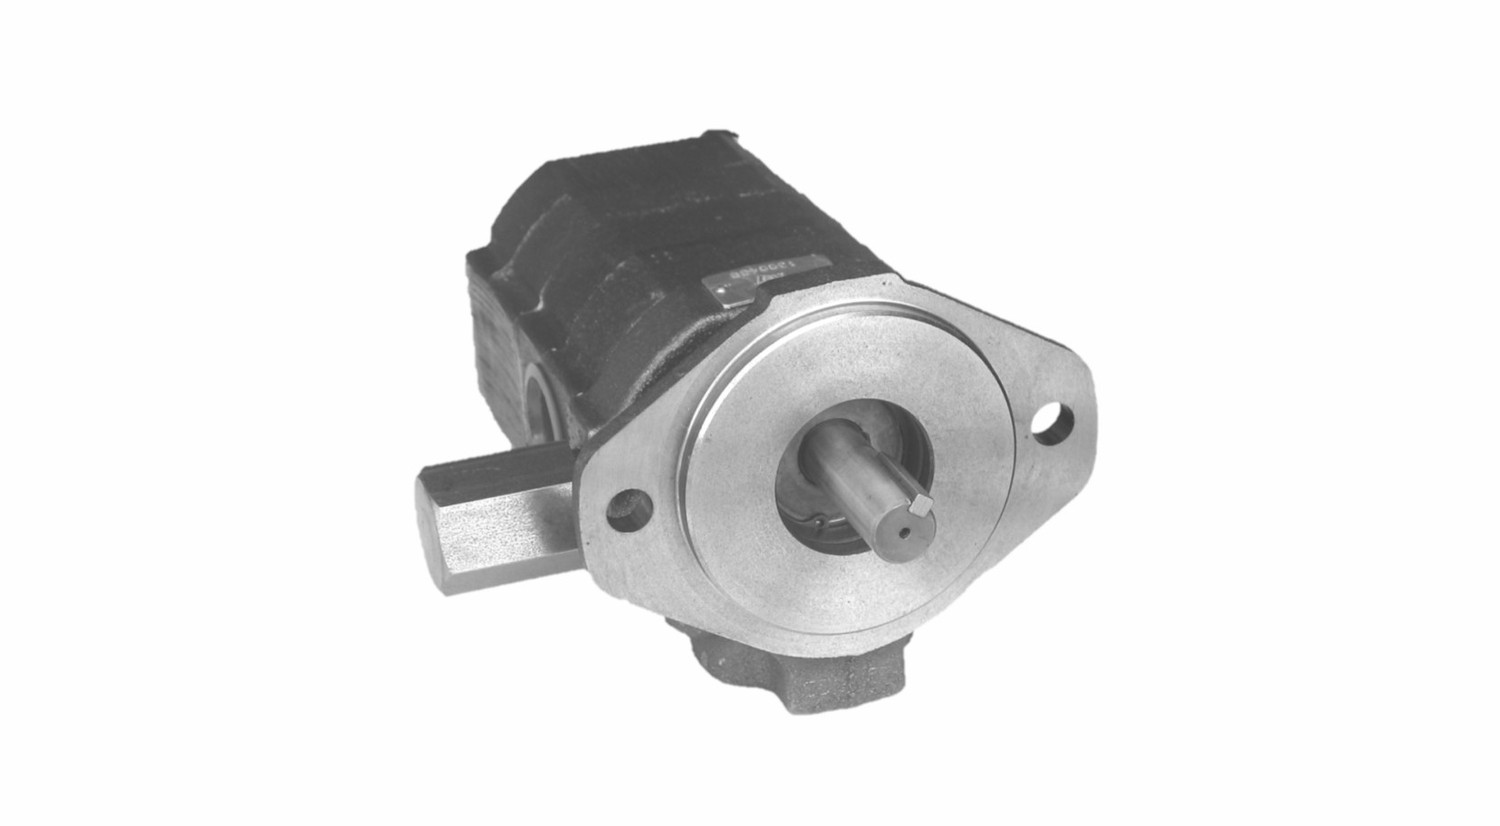 CONCENTRIC TWO-STAGE PUMP: 22 GPM MAX, 1NPT INLET, 3/4NPT OUTLET, CW